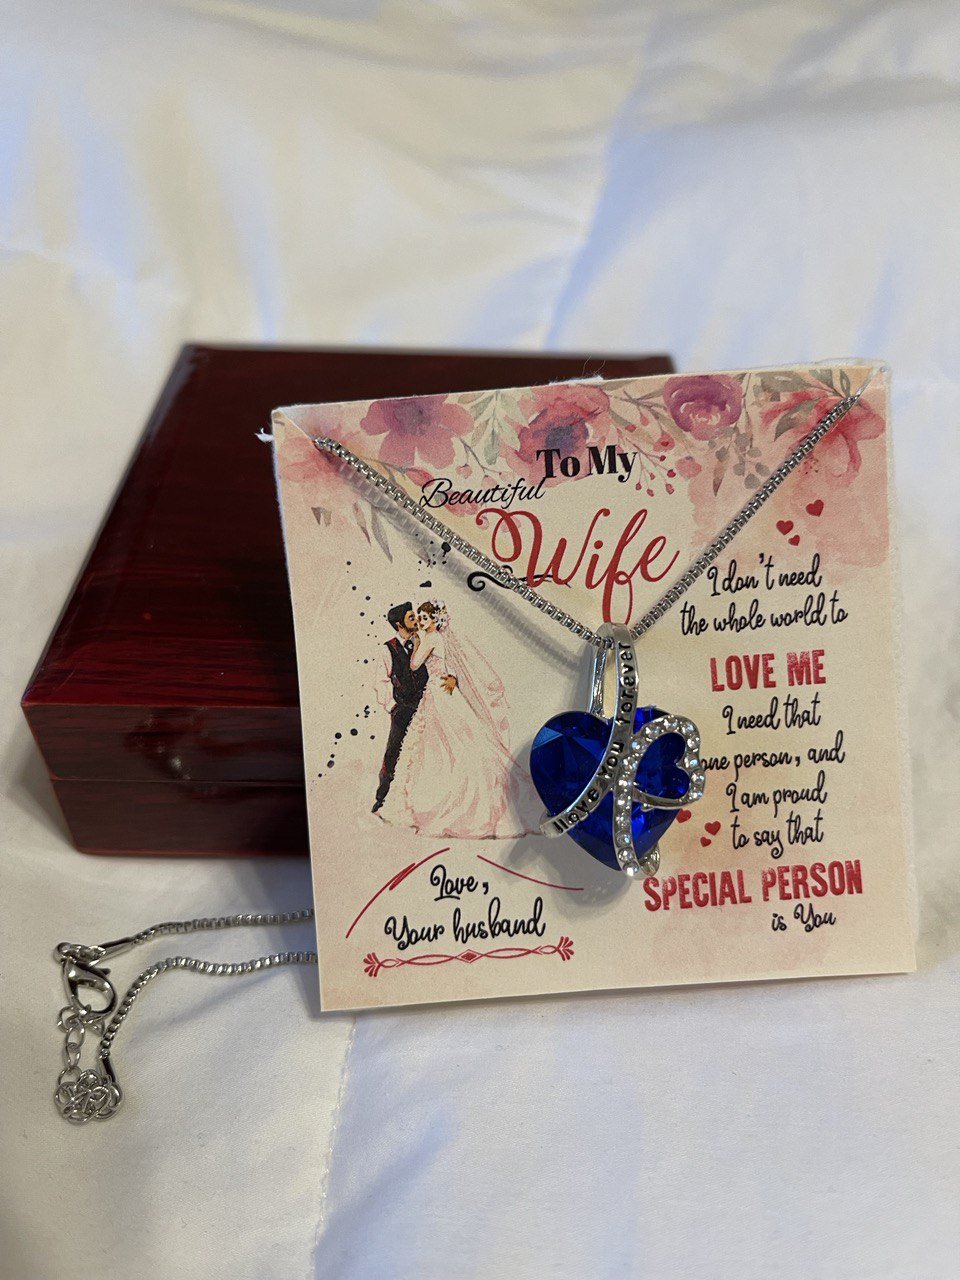 To my beautiful Wife, I don't need the whole world to love me - Blue Heart - come with mahogany teakwood Luxury box. Ready for holiday - Real Gifts Of Love